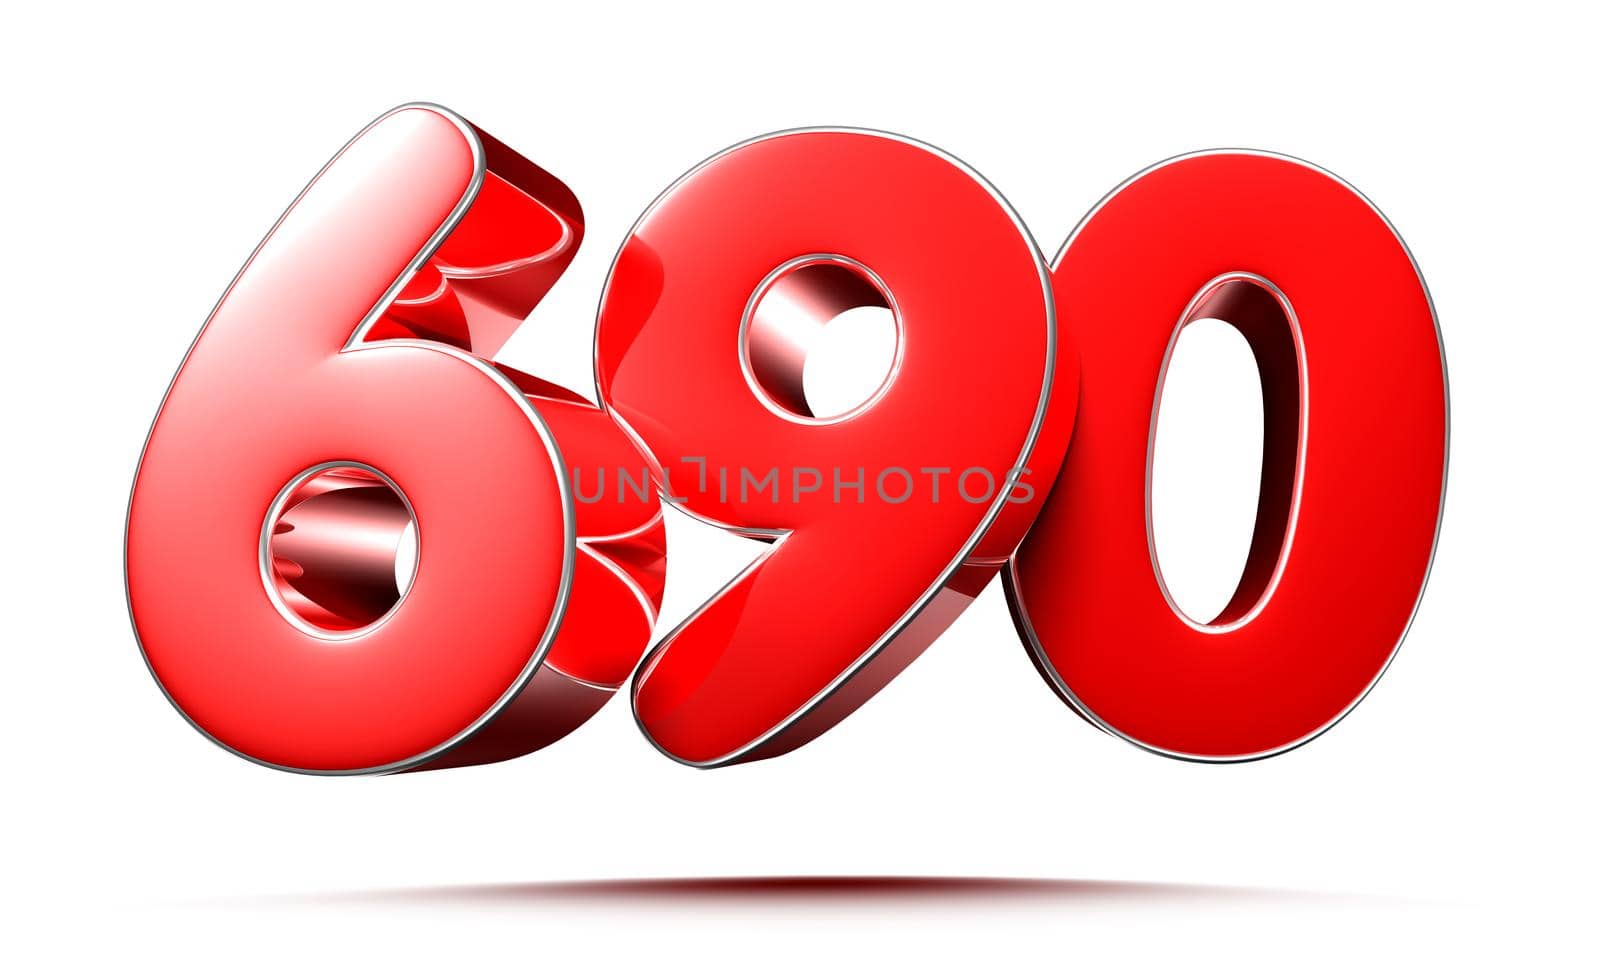 Rounded red numbers 690 on white background 3D illustration with clipping path by thitimontoyai